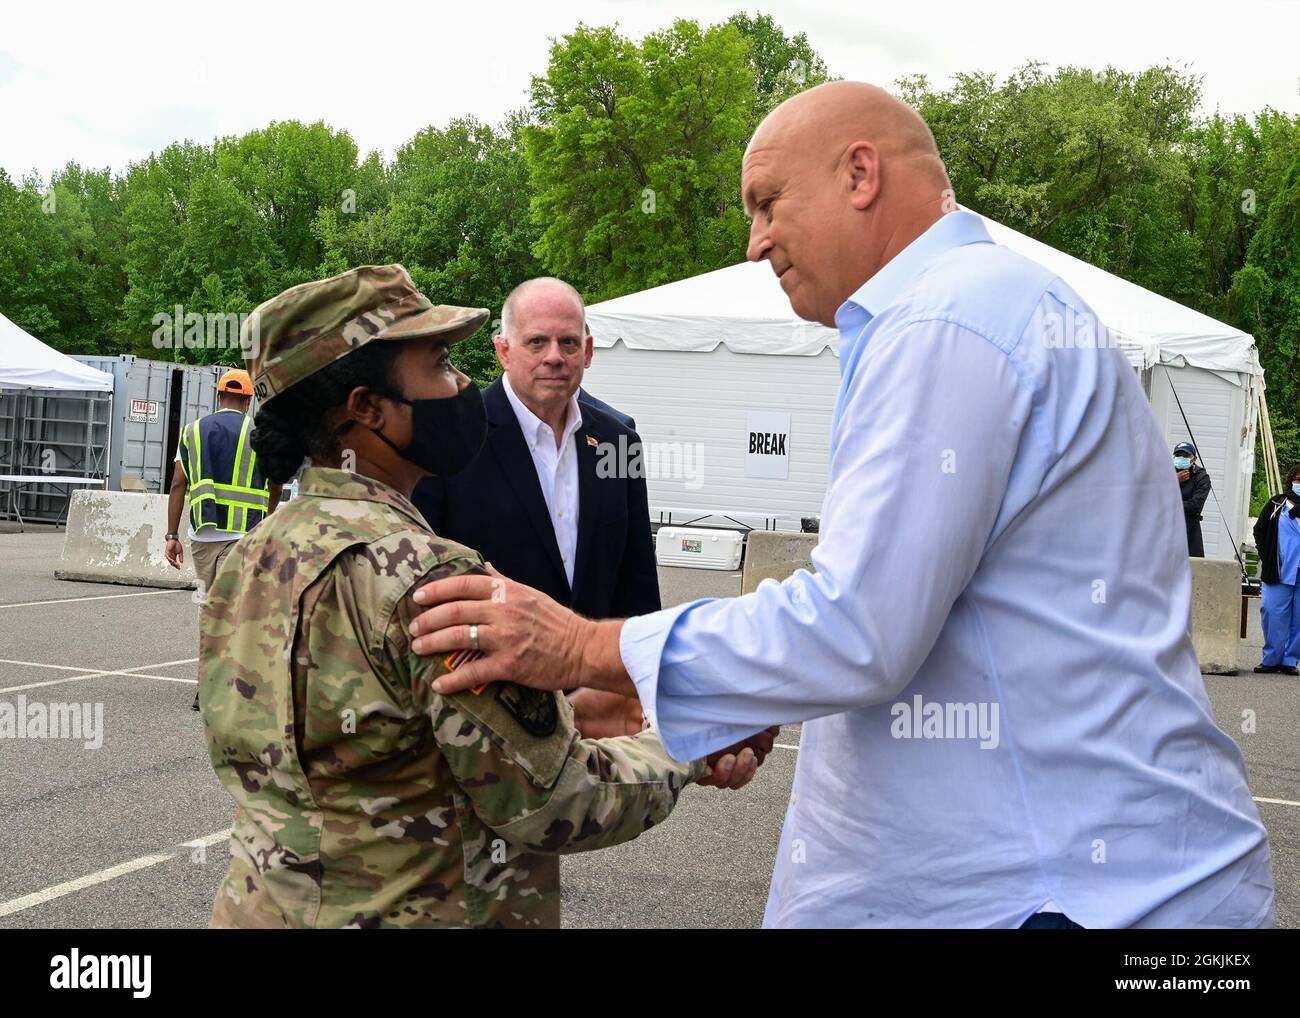 U.S. Army Brig. Gen. Janeen Birckhead, commander of the Maryland Army National Guard is greeted by Cal Ripken Jr. during a visit to the Ripken Stadium vaccination site on May 5, 2021, in Aberdeen, Maryland. Birckhead leads the Vaccine Equity Task Force, an initiative to promote equitable access to the COVID-19 vaccine throughout Maryland. Stock Photo